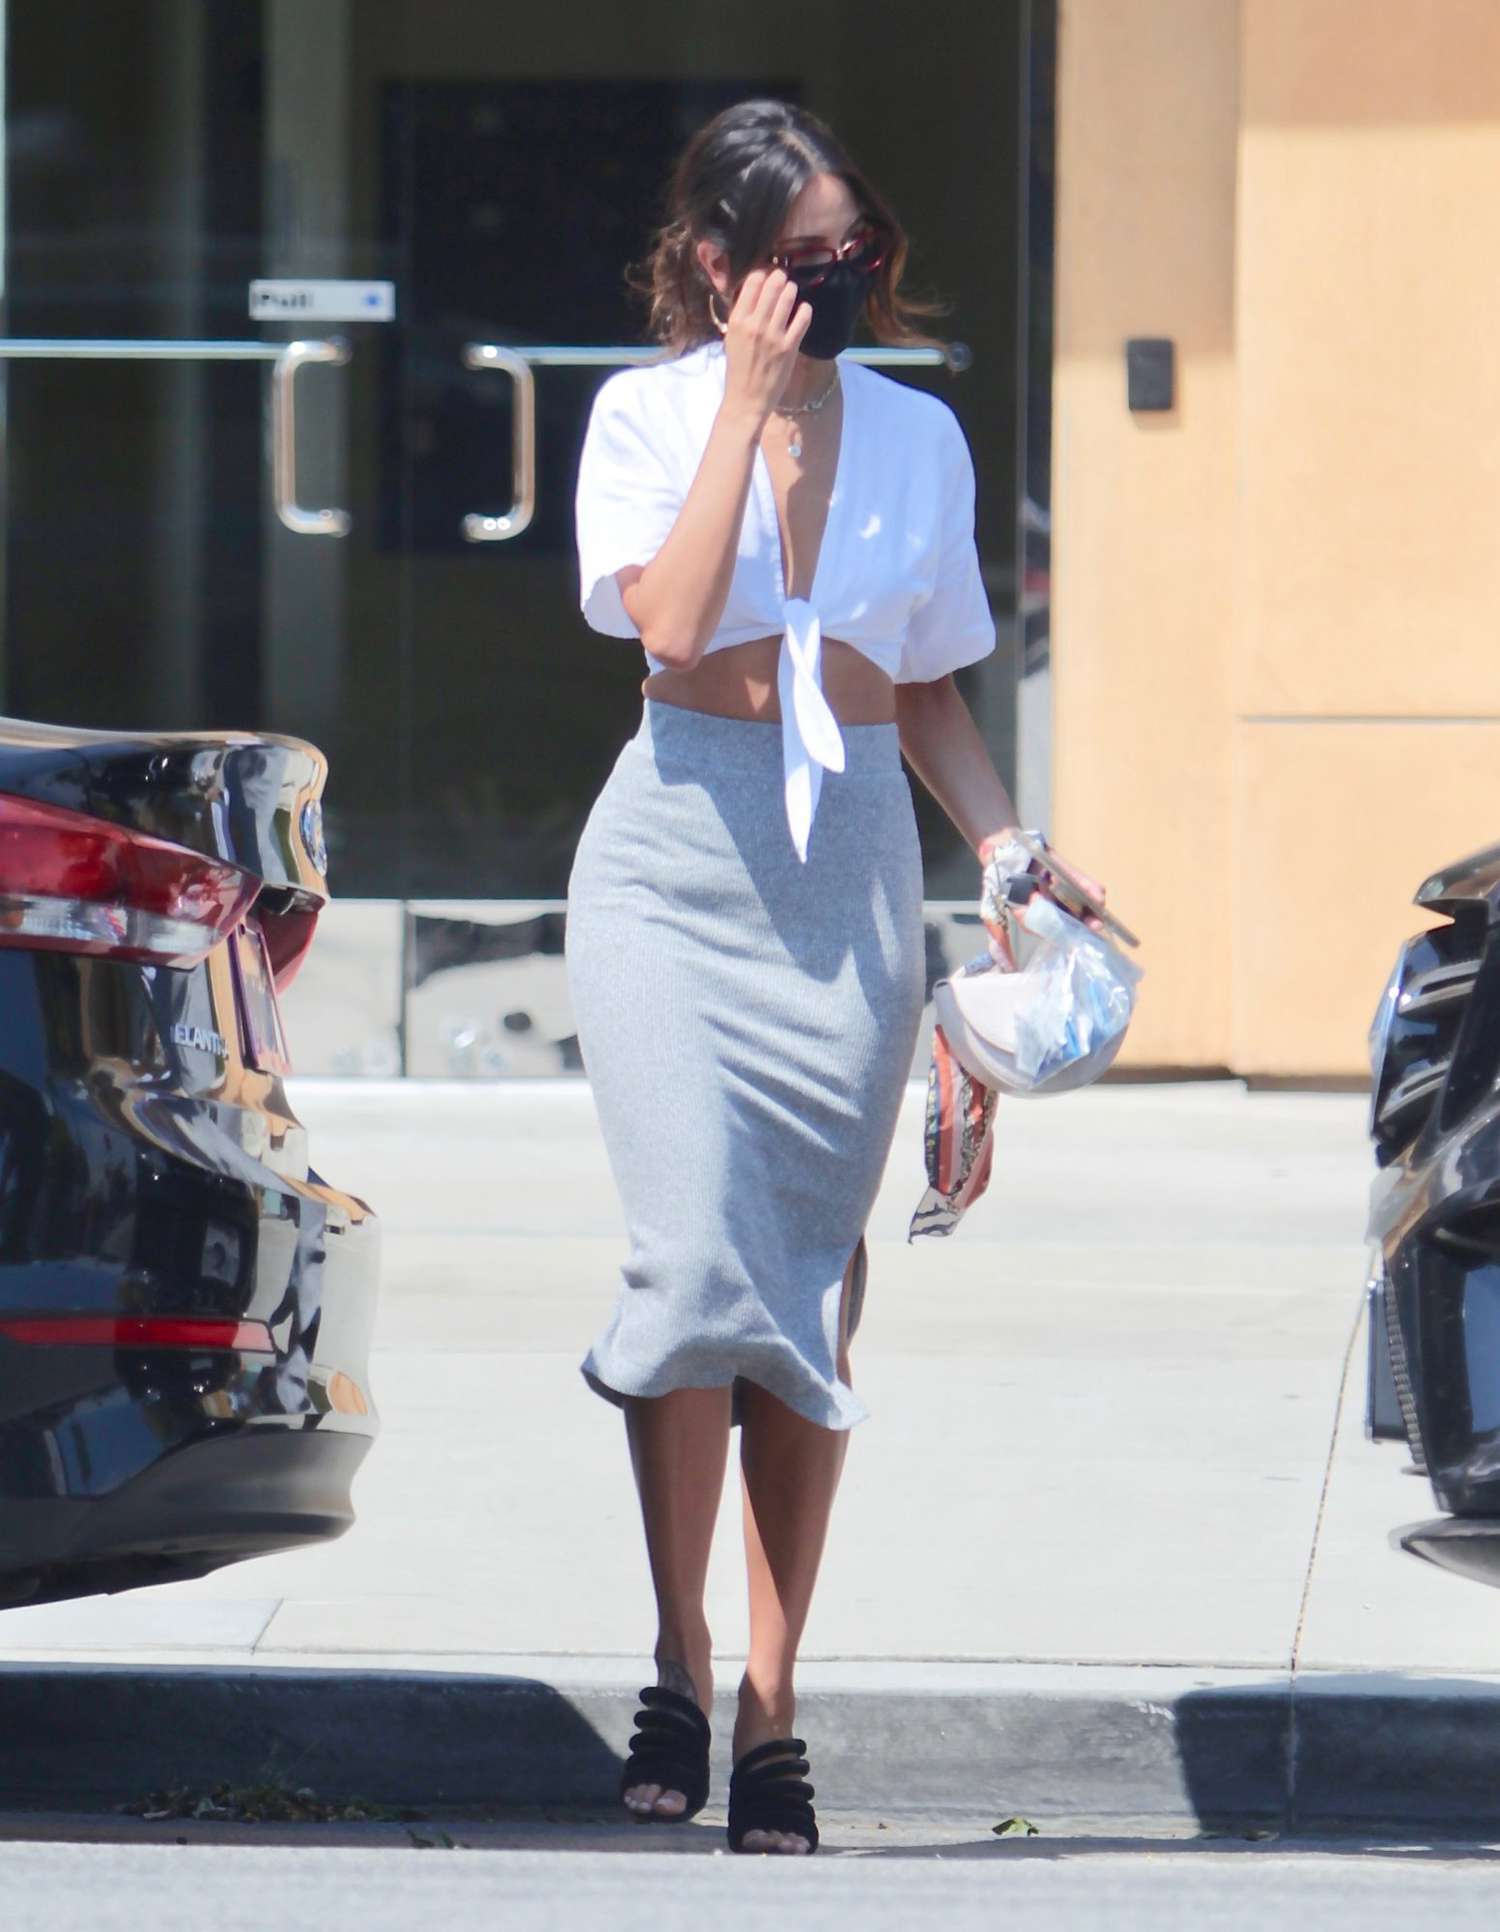 Eiza Gonzalez steps out in a grey pencil skirt and white buttoned down top for a lunch meeting. Eiza was also seen wearing prescription glasses. 18 Aug 2020 Pictured: Eiza Gonzalez steps out in a grey pencil skirt and white buttoned down top for a lunch meeting.